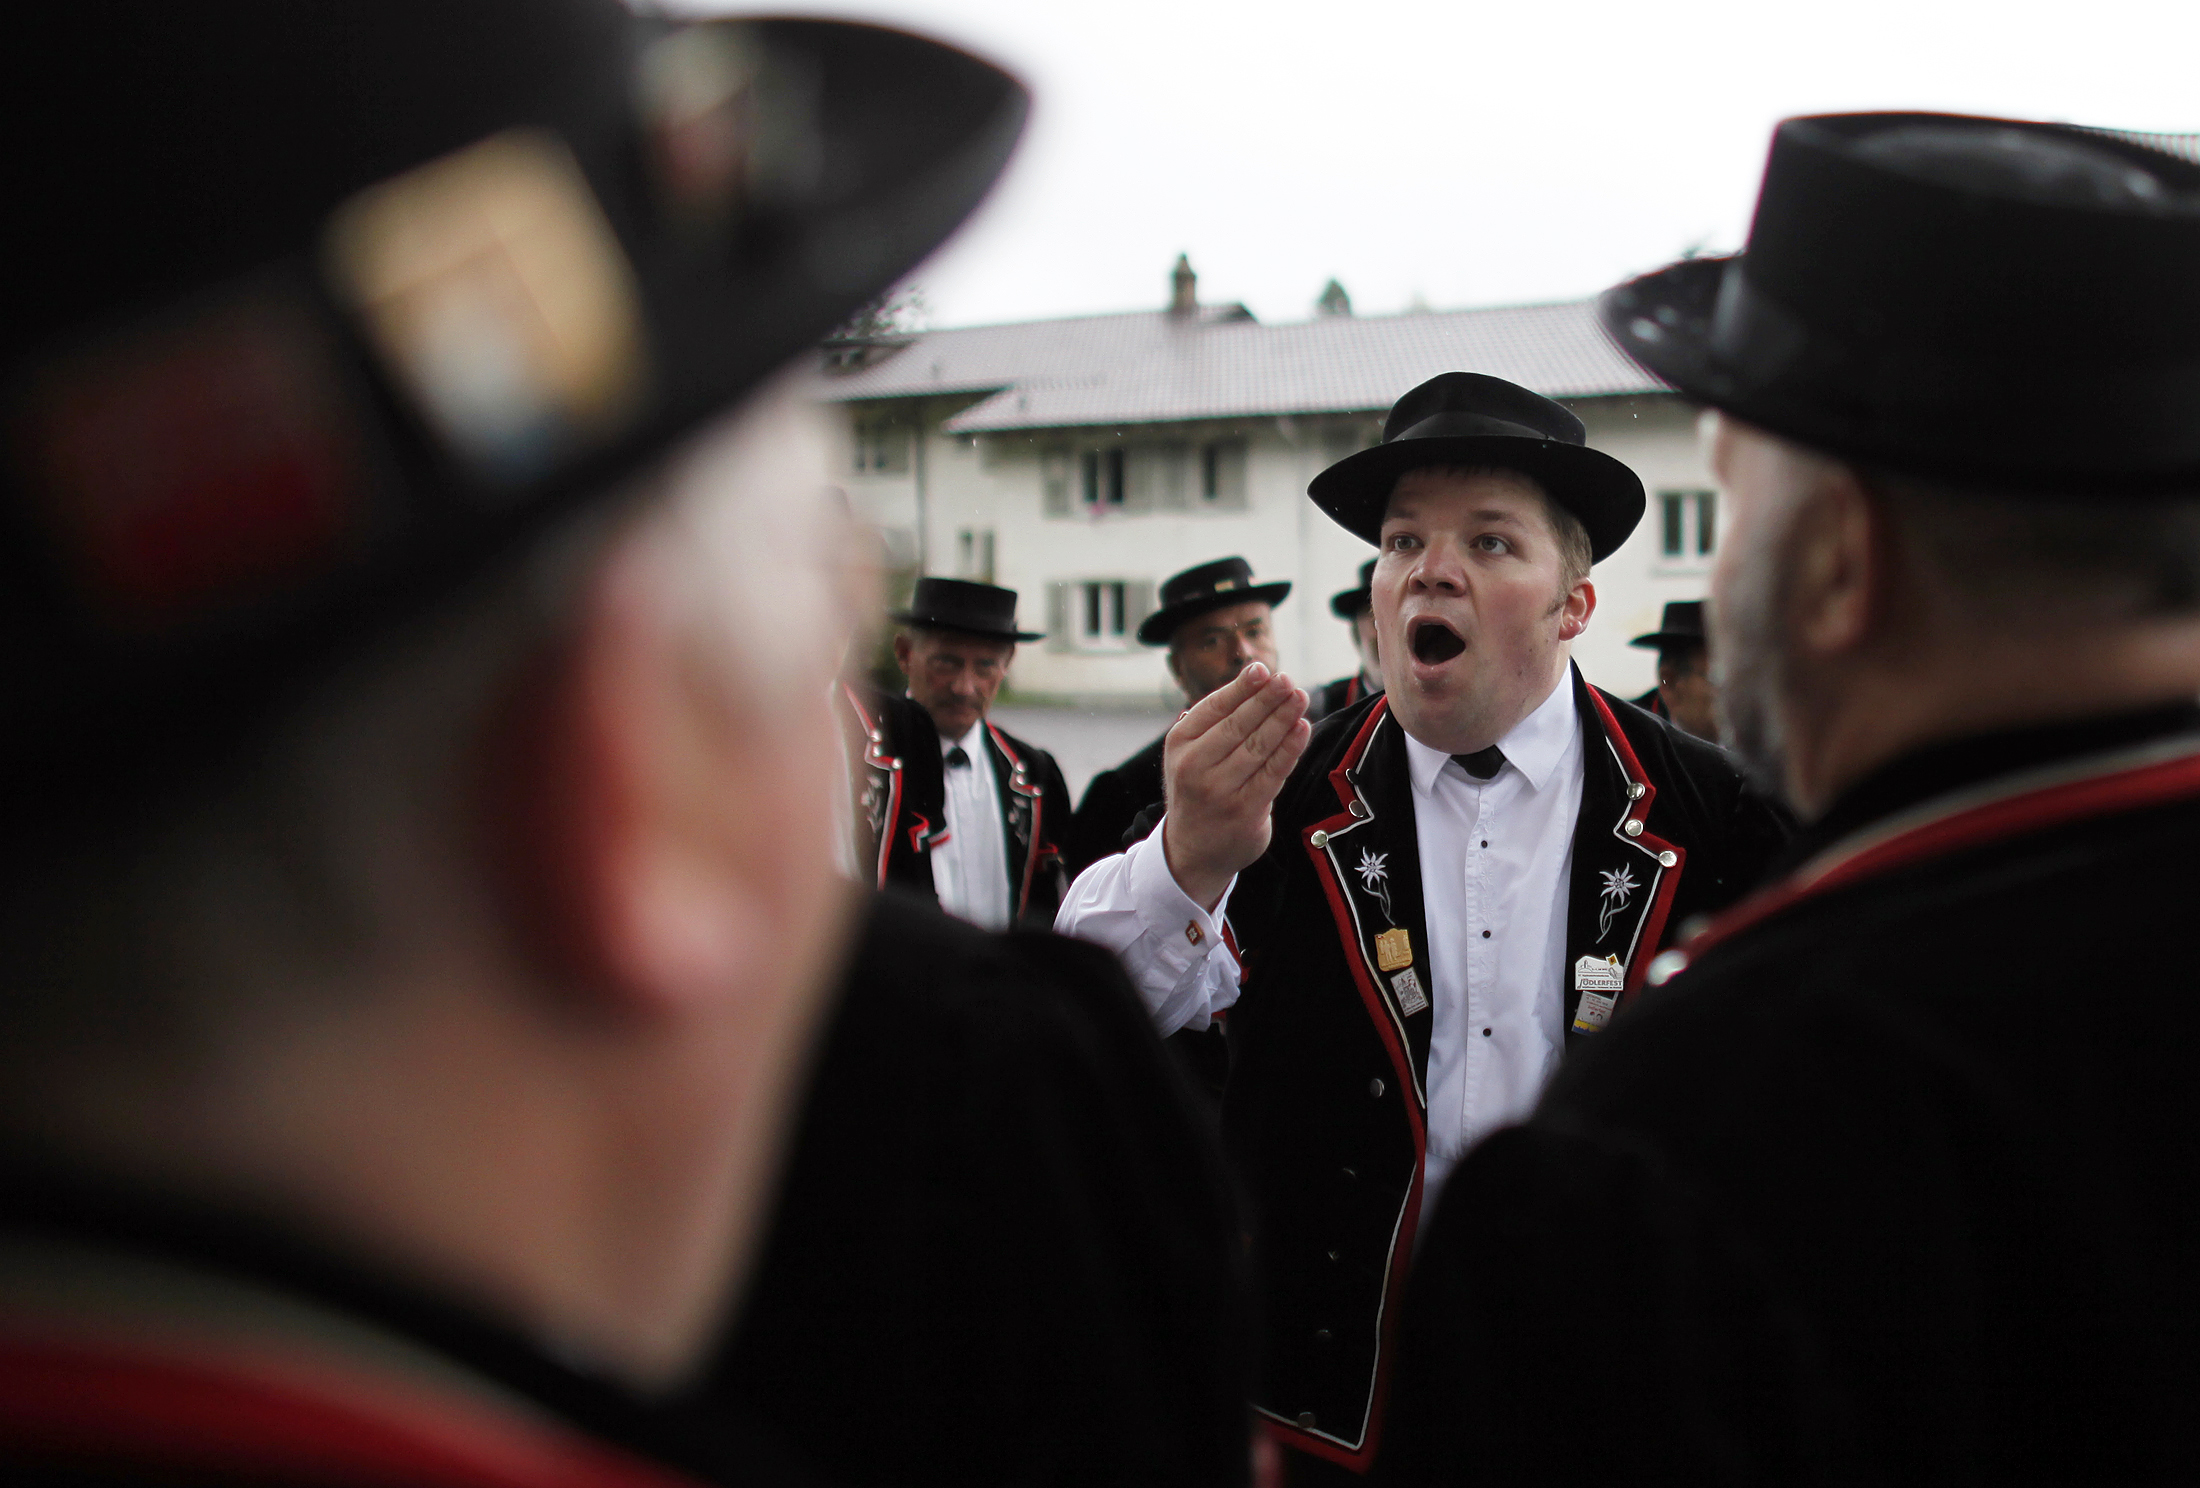 PHOTO: Yodelers dressed in traditional Swiss costumes perform at the 28th Federal Yodelling Festival in Interlaken, Switzerland, June 18, 2011.